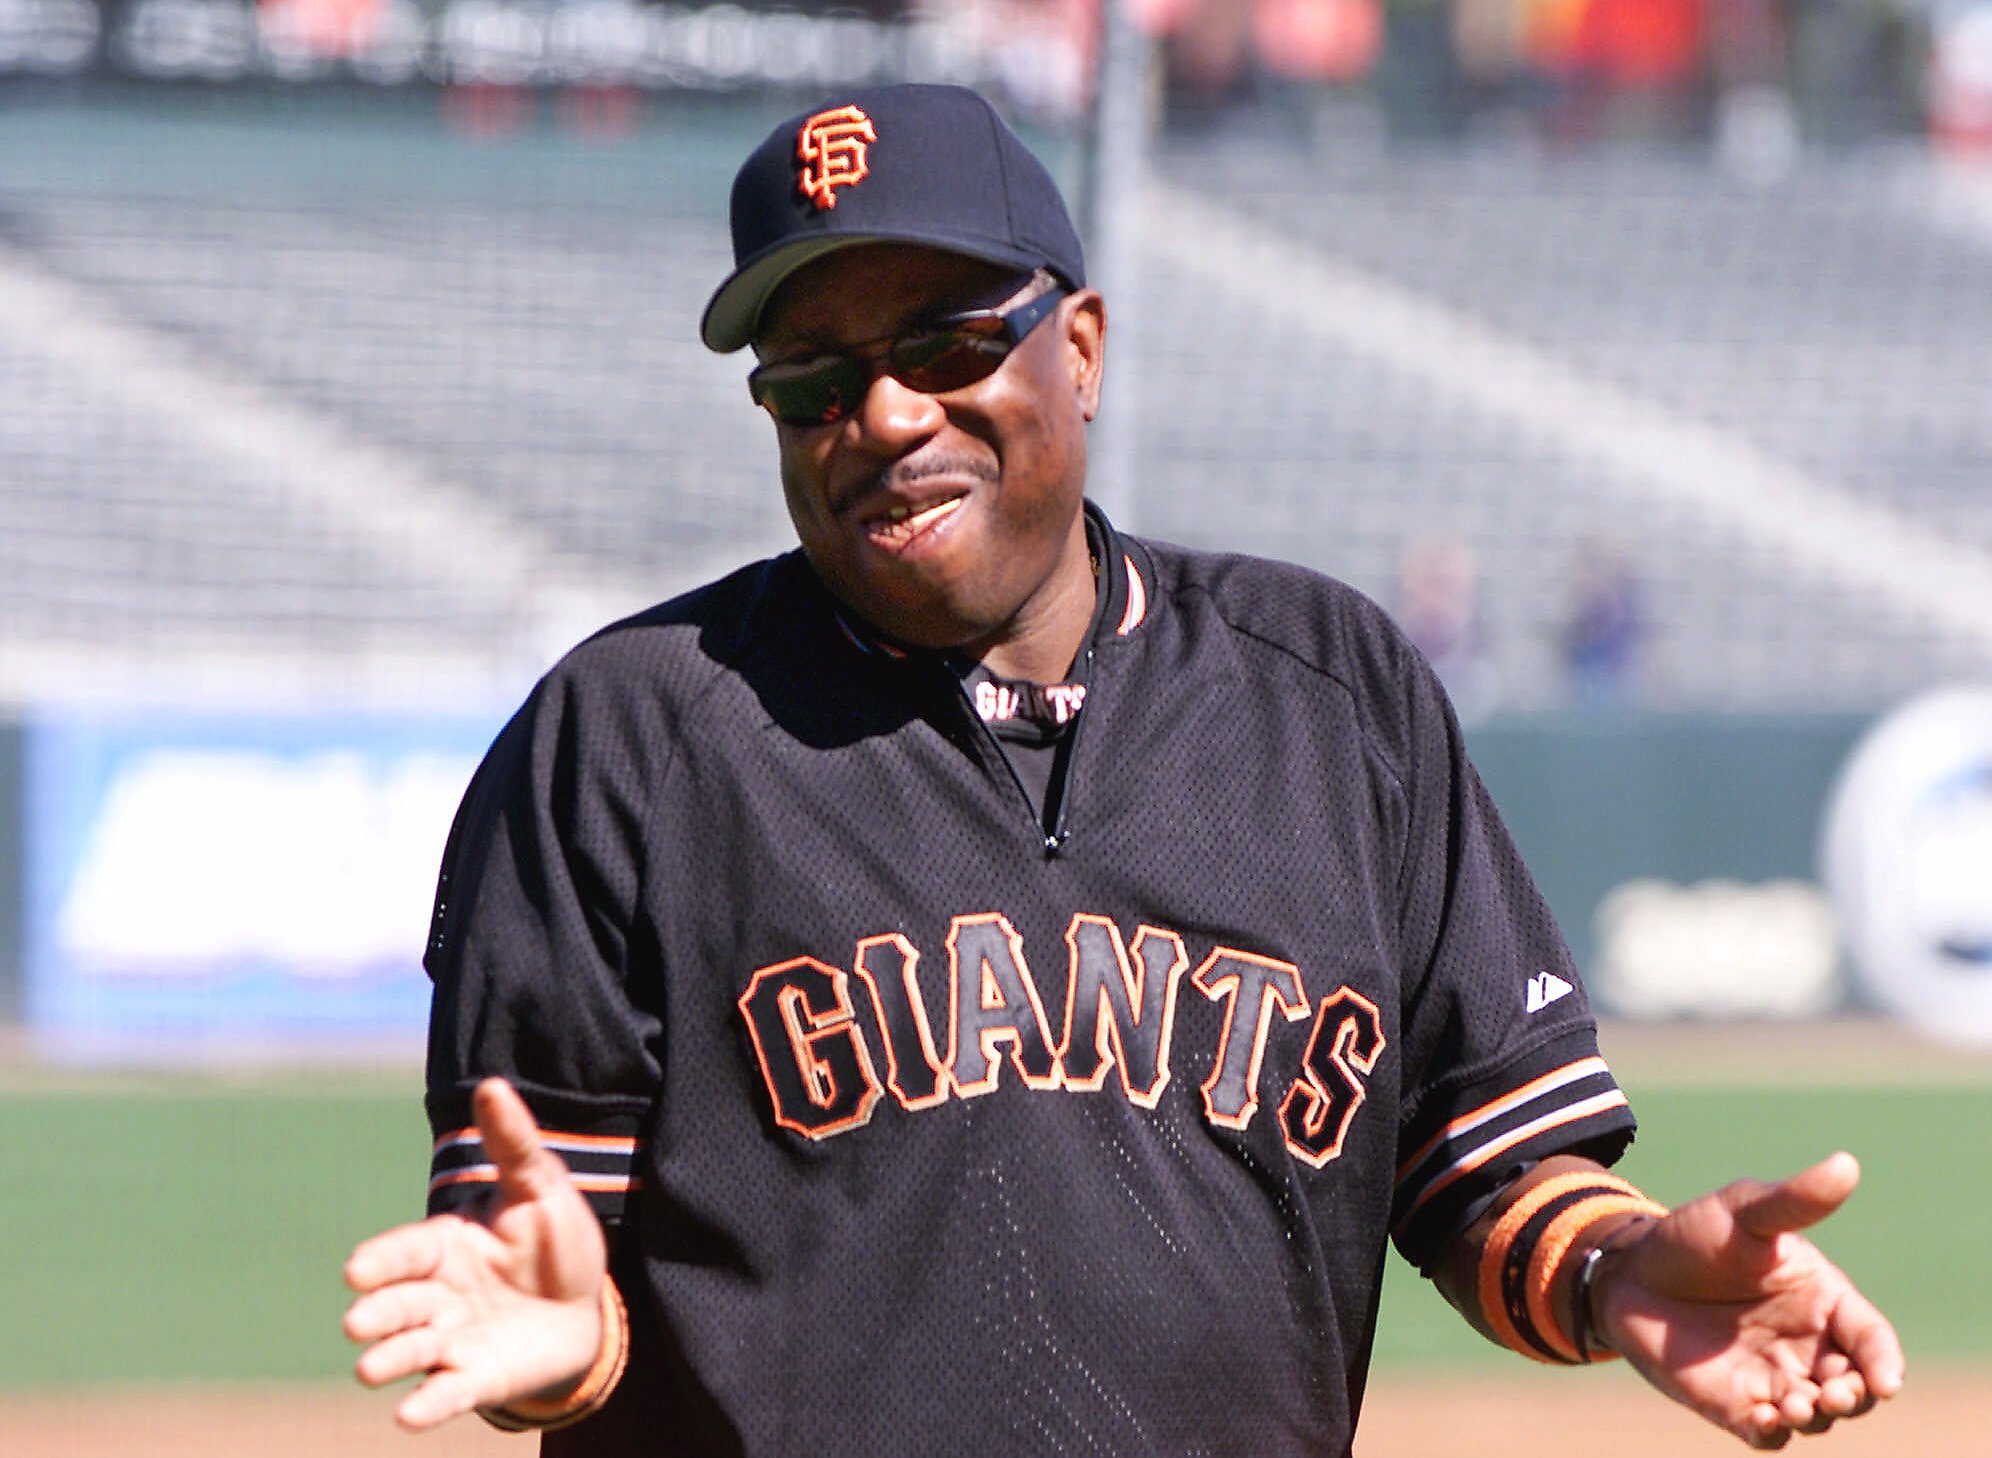 Giants bringing back Dusty Baker as special adviser - SFChronicle.com1992 x 1458